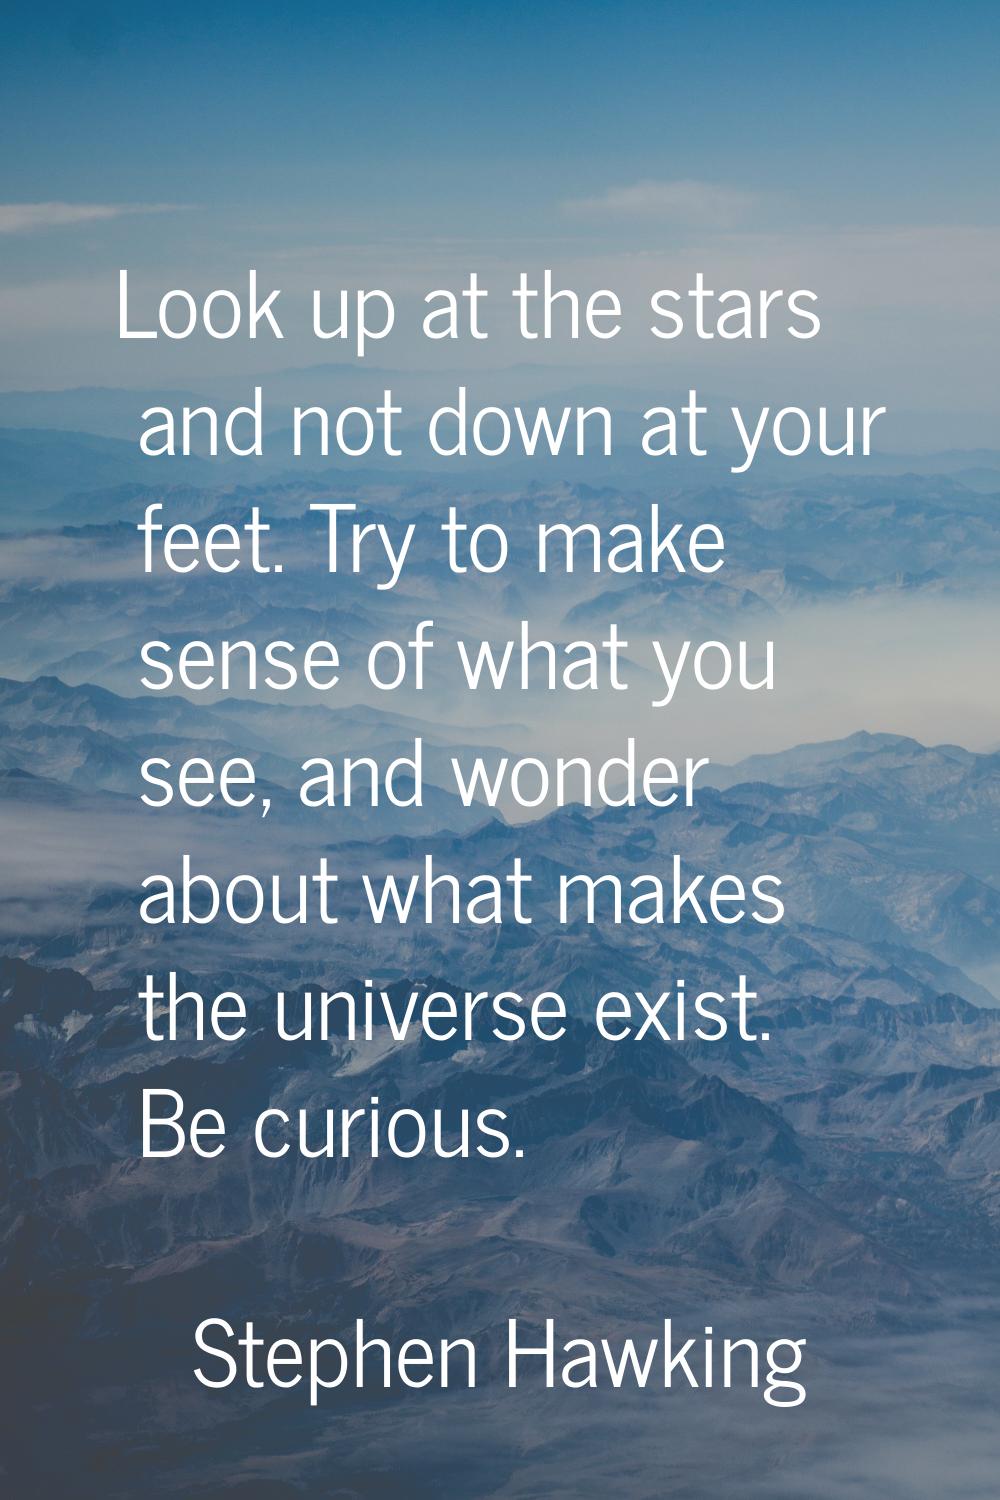 Look up at the stars and not down at your feet. Try to make sense of what you see, and wonder about